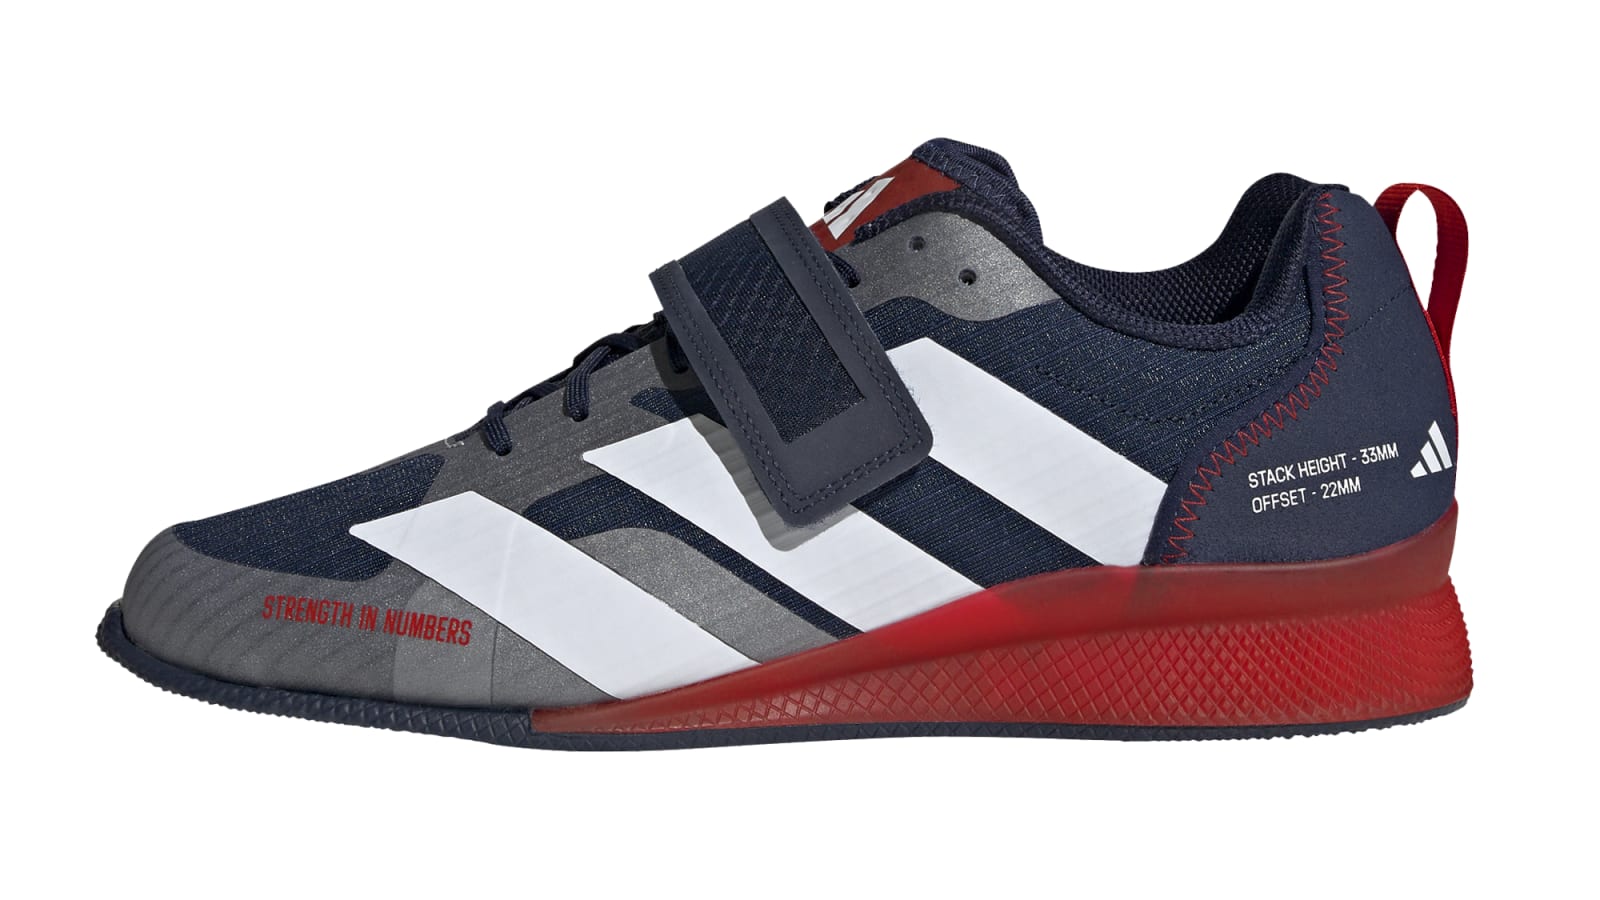 Litoral charla guión Adidas Adipower III Weightlifting Shoes - Team Navy Blue 2 / FTWR White /  Better Scarlet | Rogue Fitness